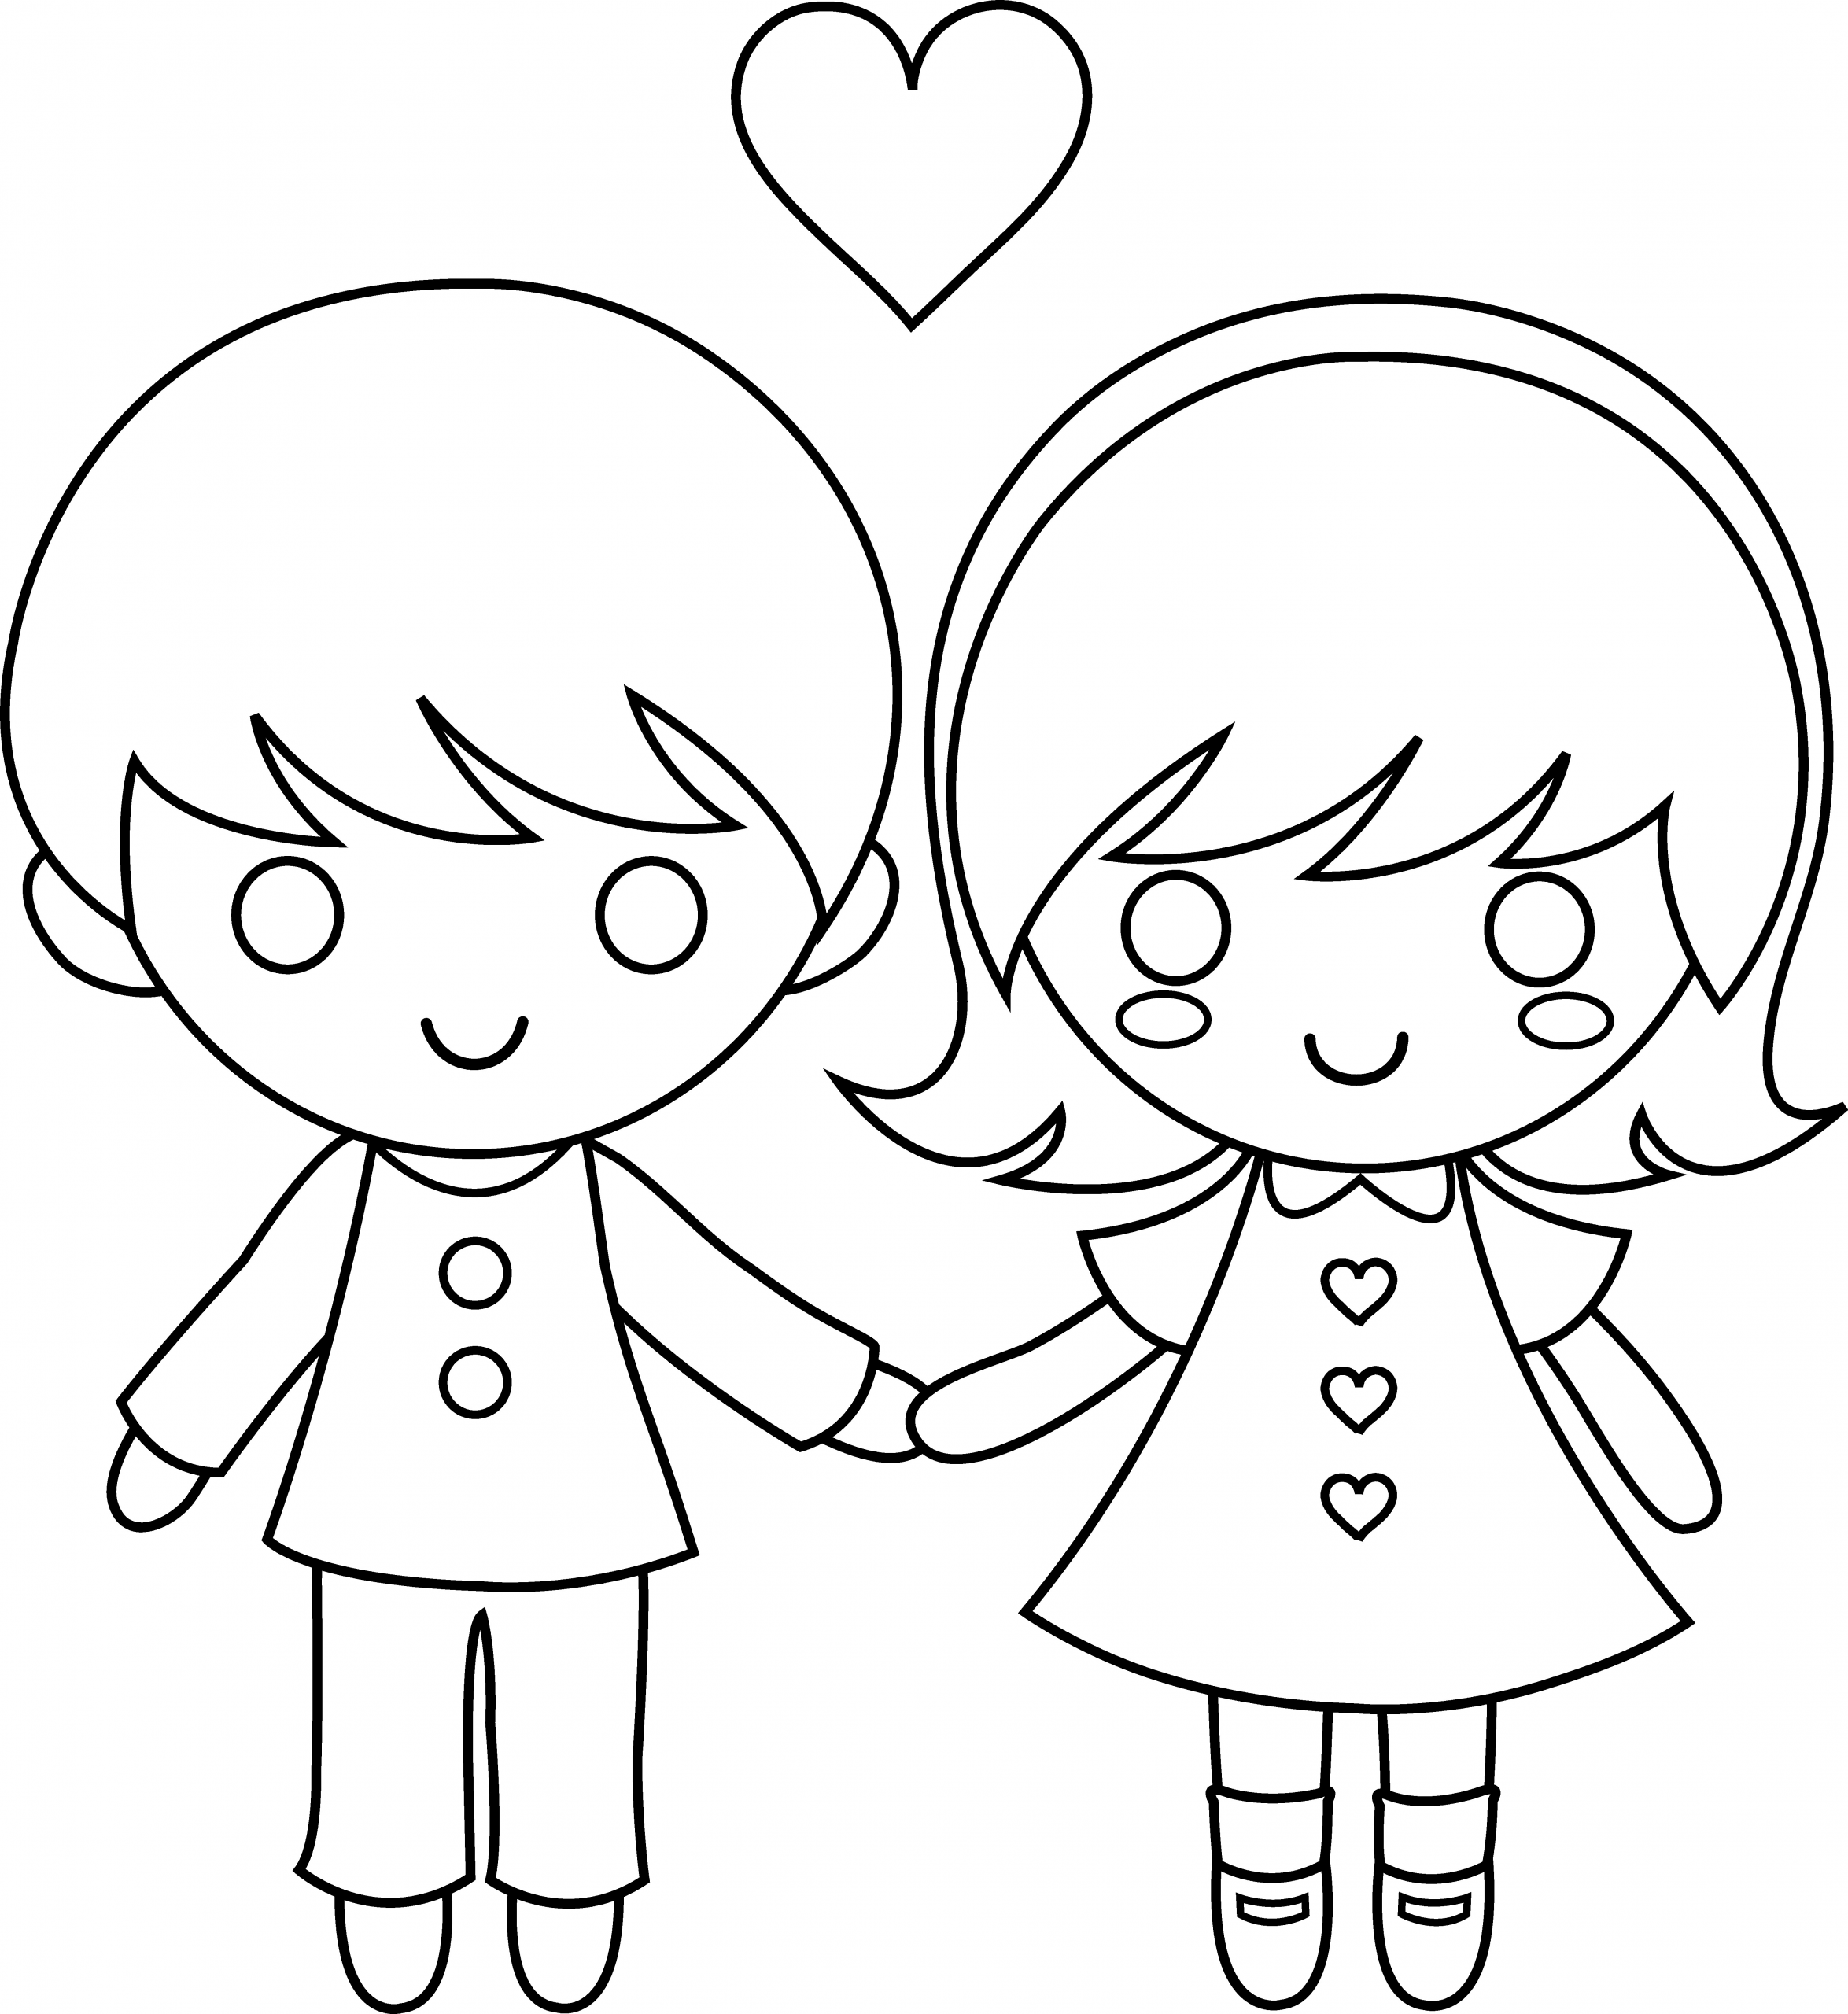 Coloring Pages For Boys Easy
 happy valentine s day clip art black and white